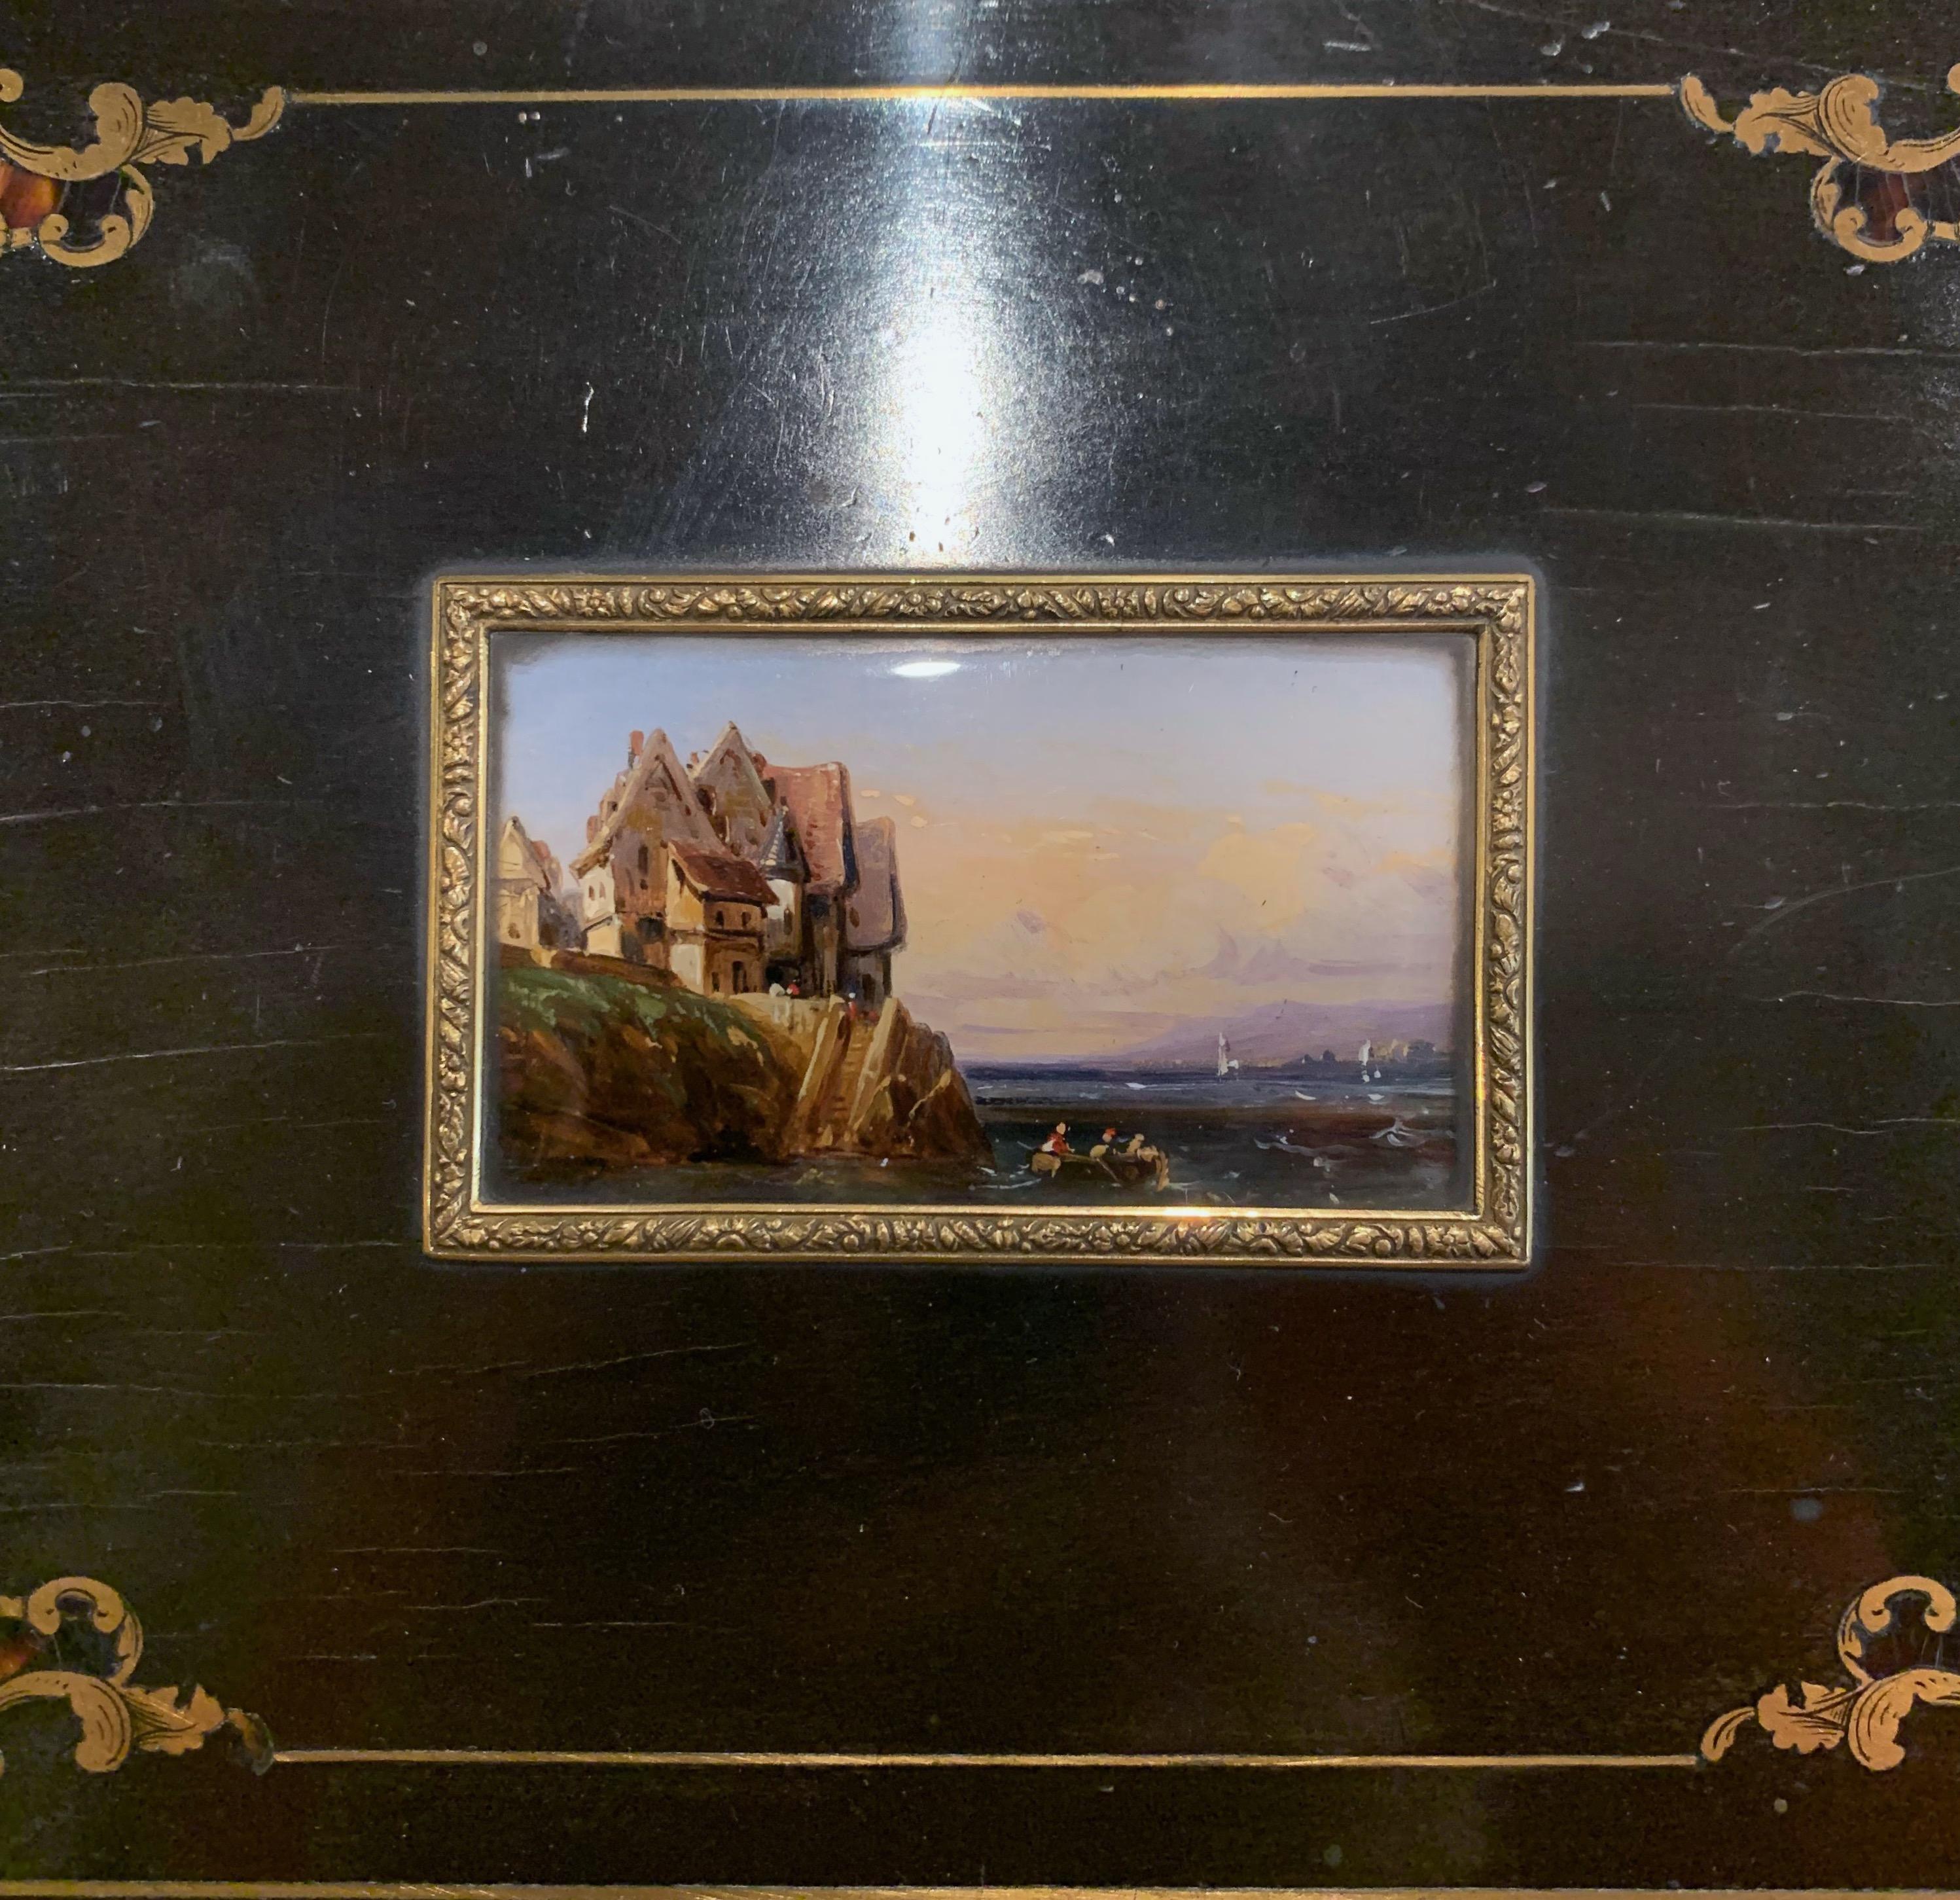 Hand-Crafted 19th Century French Napoleon III Rosewood & Brass Jewelry Box with Painted Scene